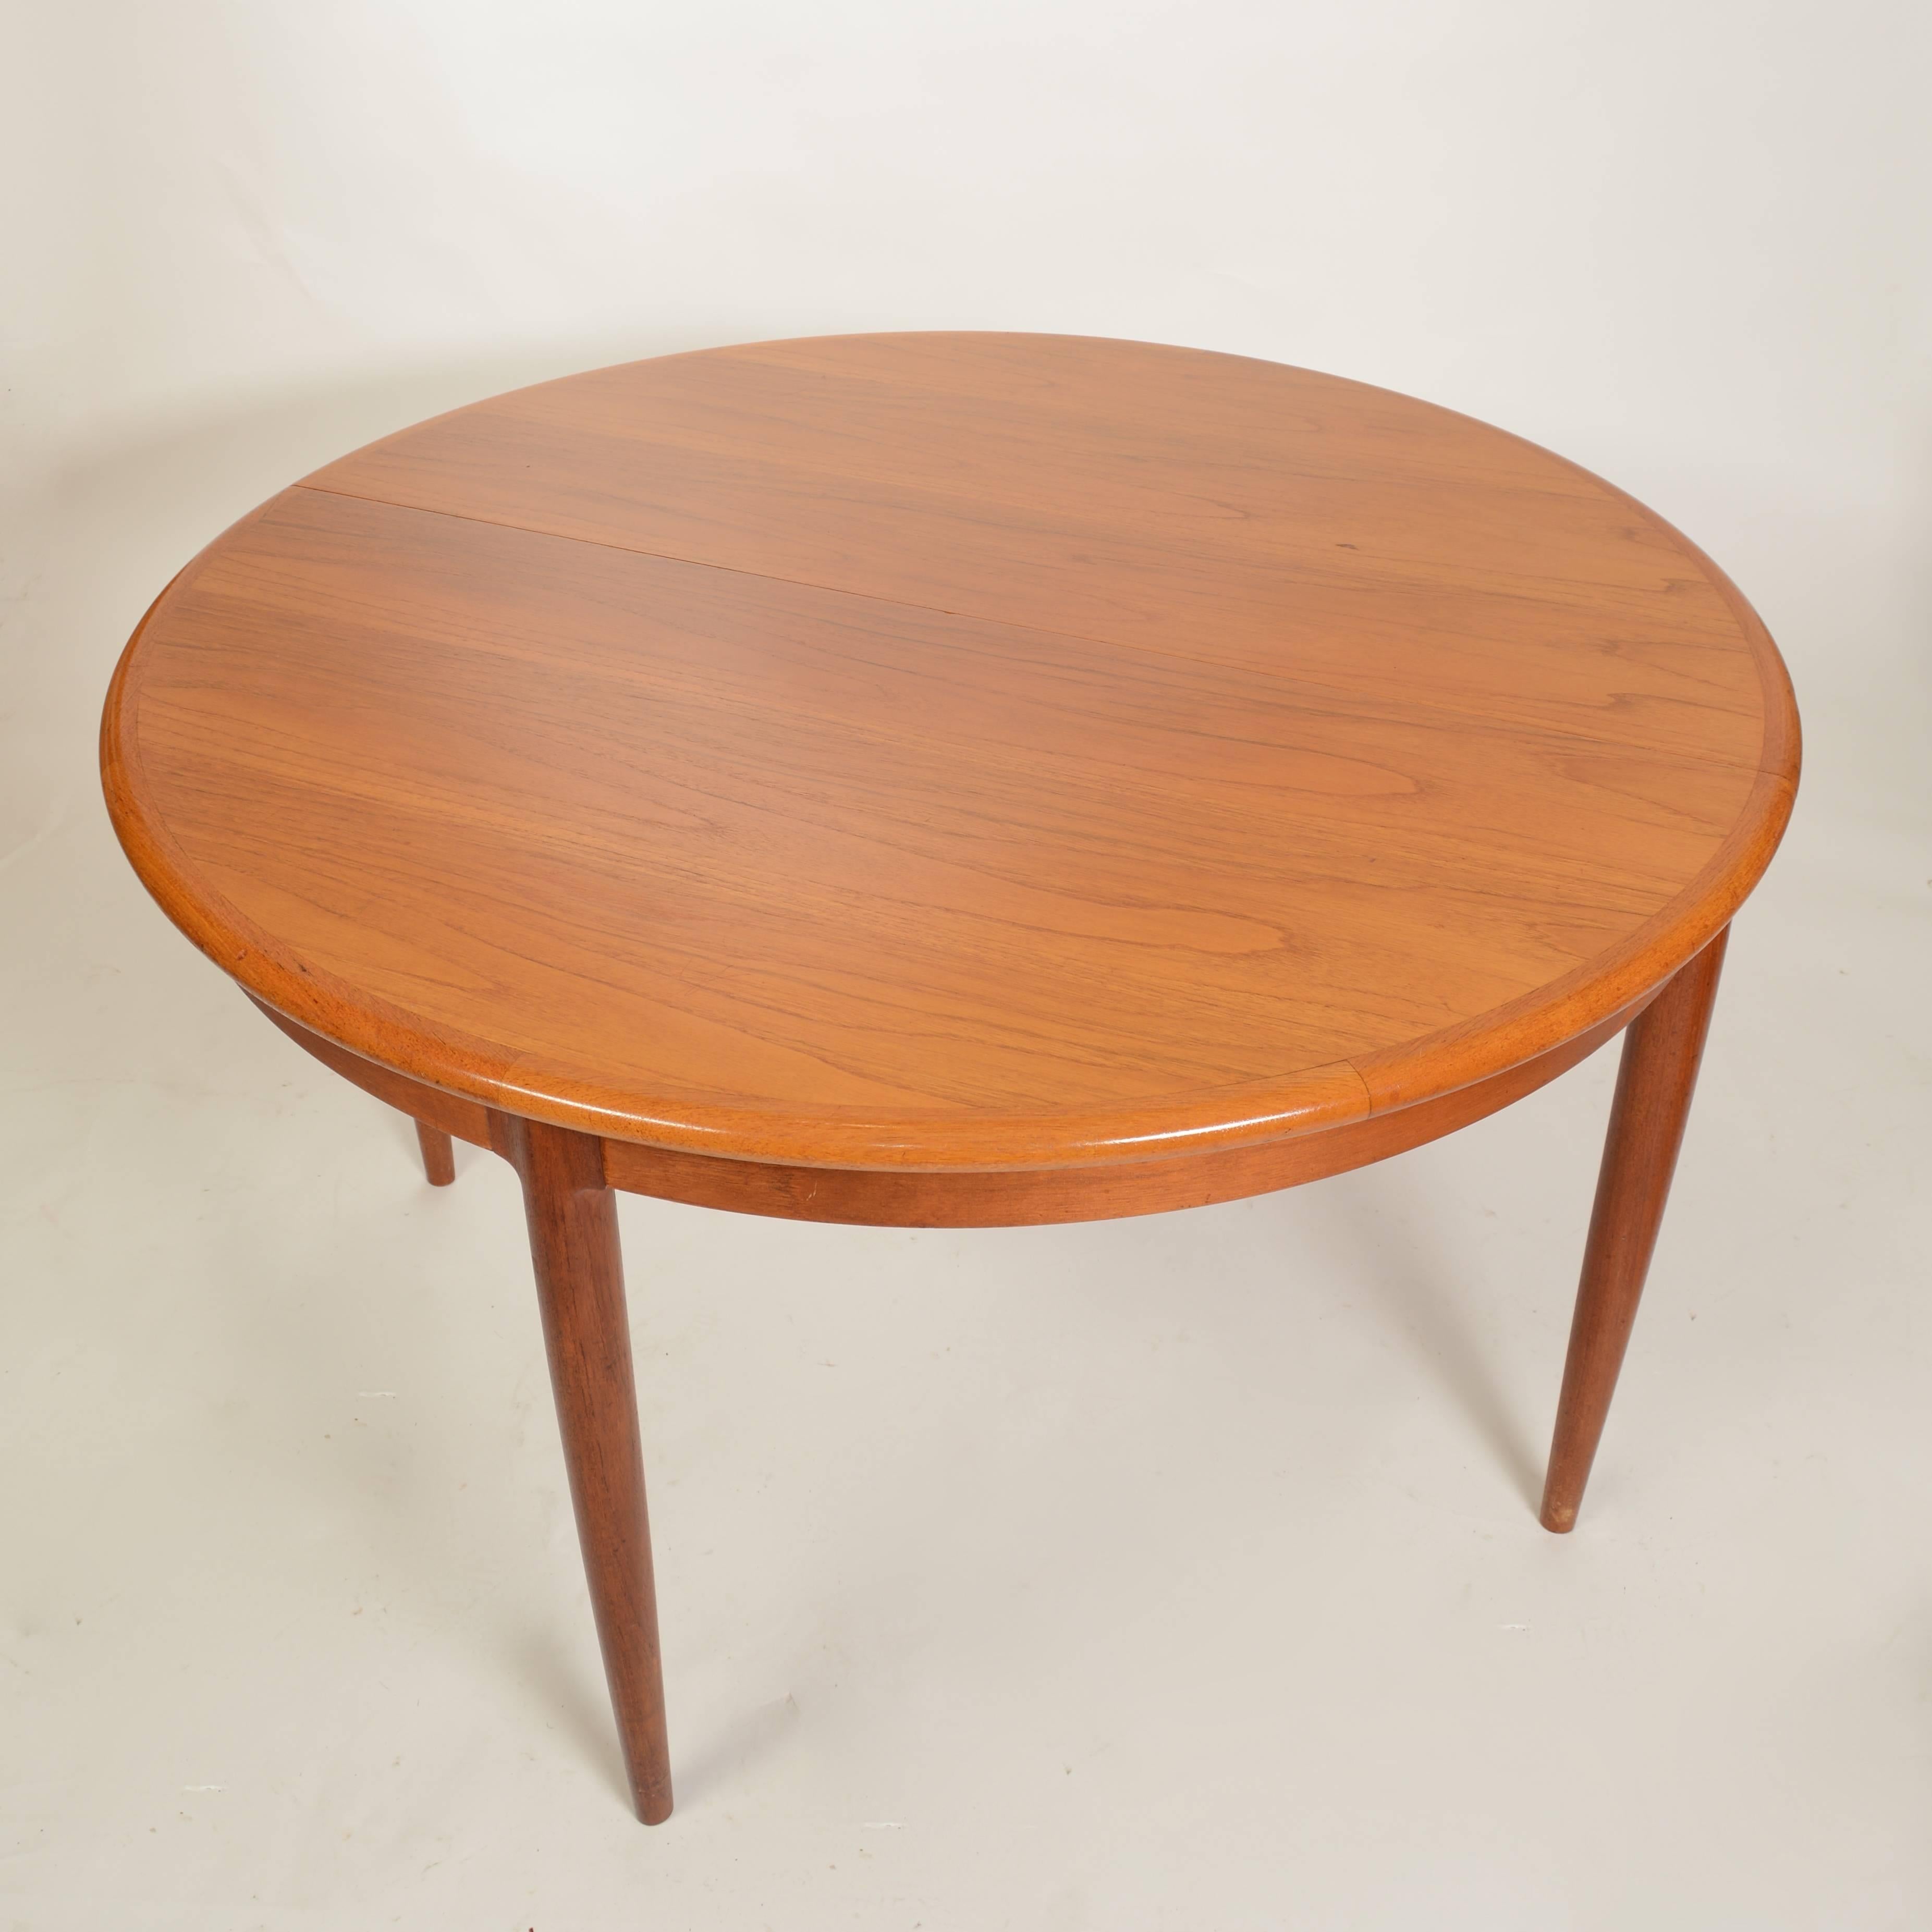 Danish Niels Otto Moller for J. L. Moller #15 Teak Table with Butterfly Leaf